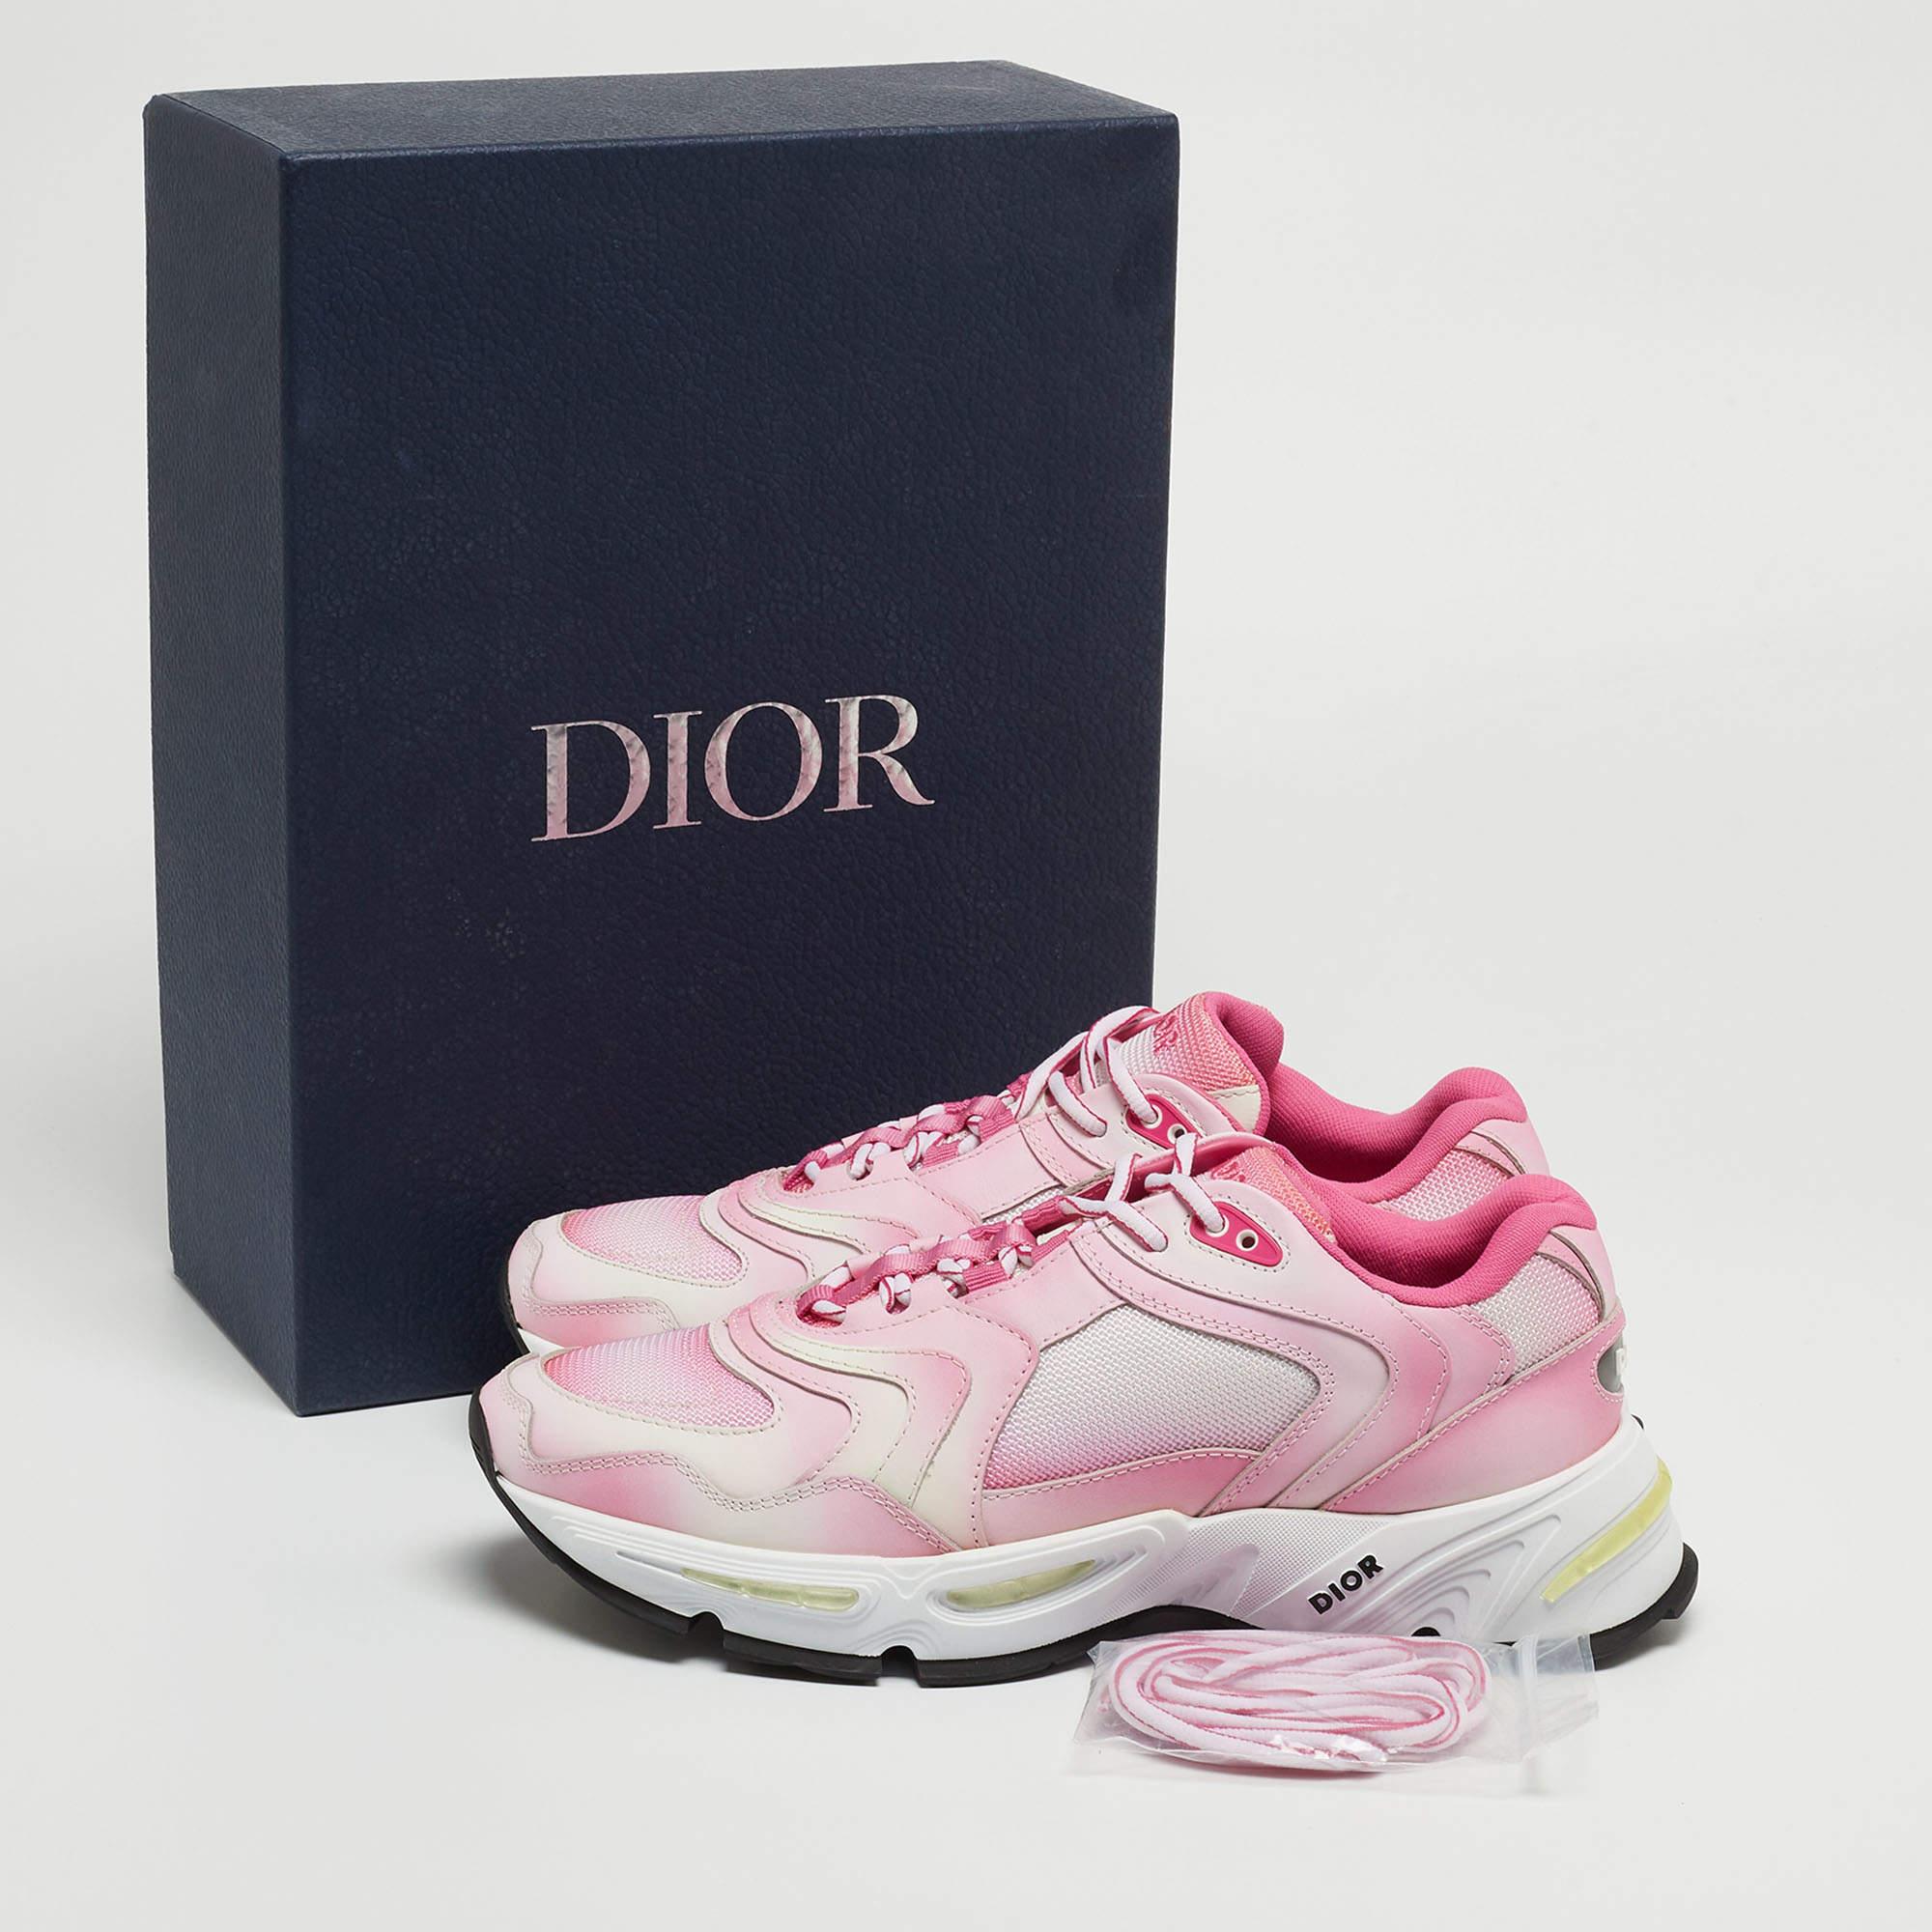 DIOR Pink Mesh and Leather CD1 Gradient Sneakers Size 42 In Excellent Condition For Sale In Dubai, Al Qouz 2